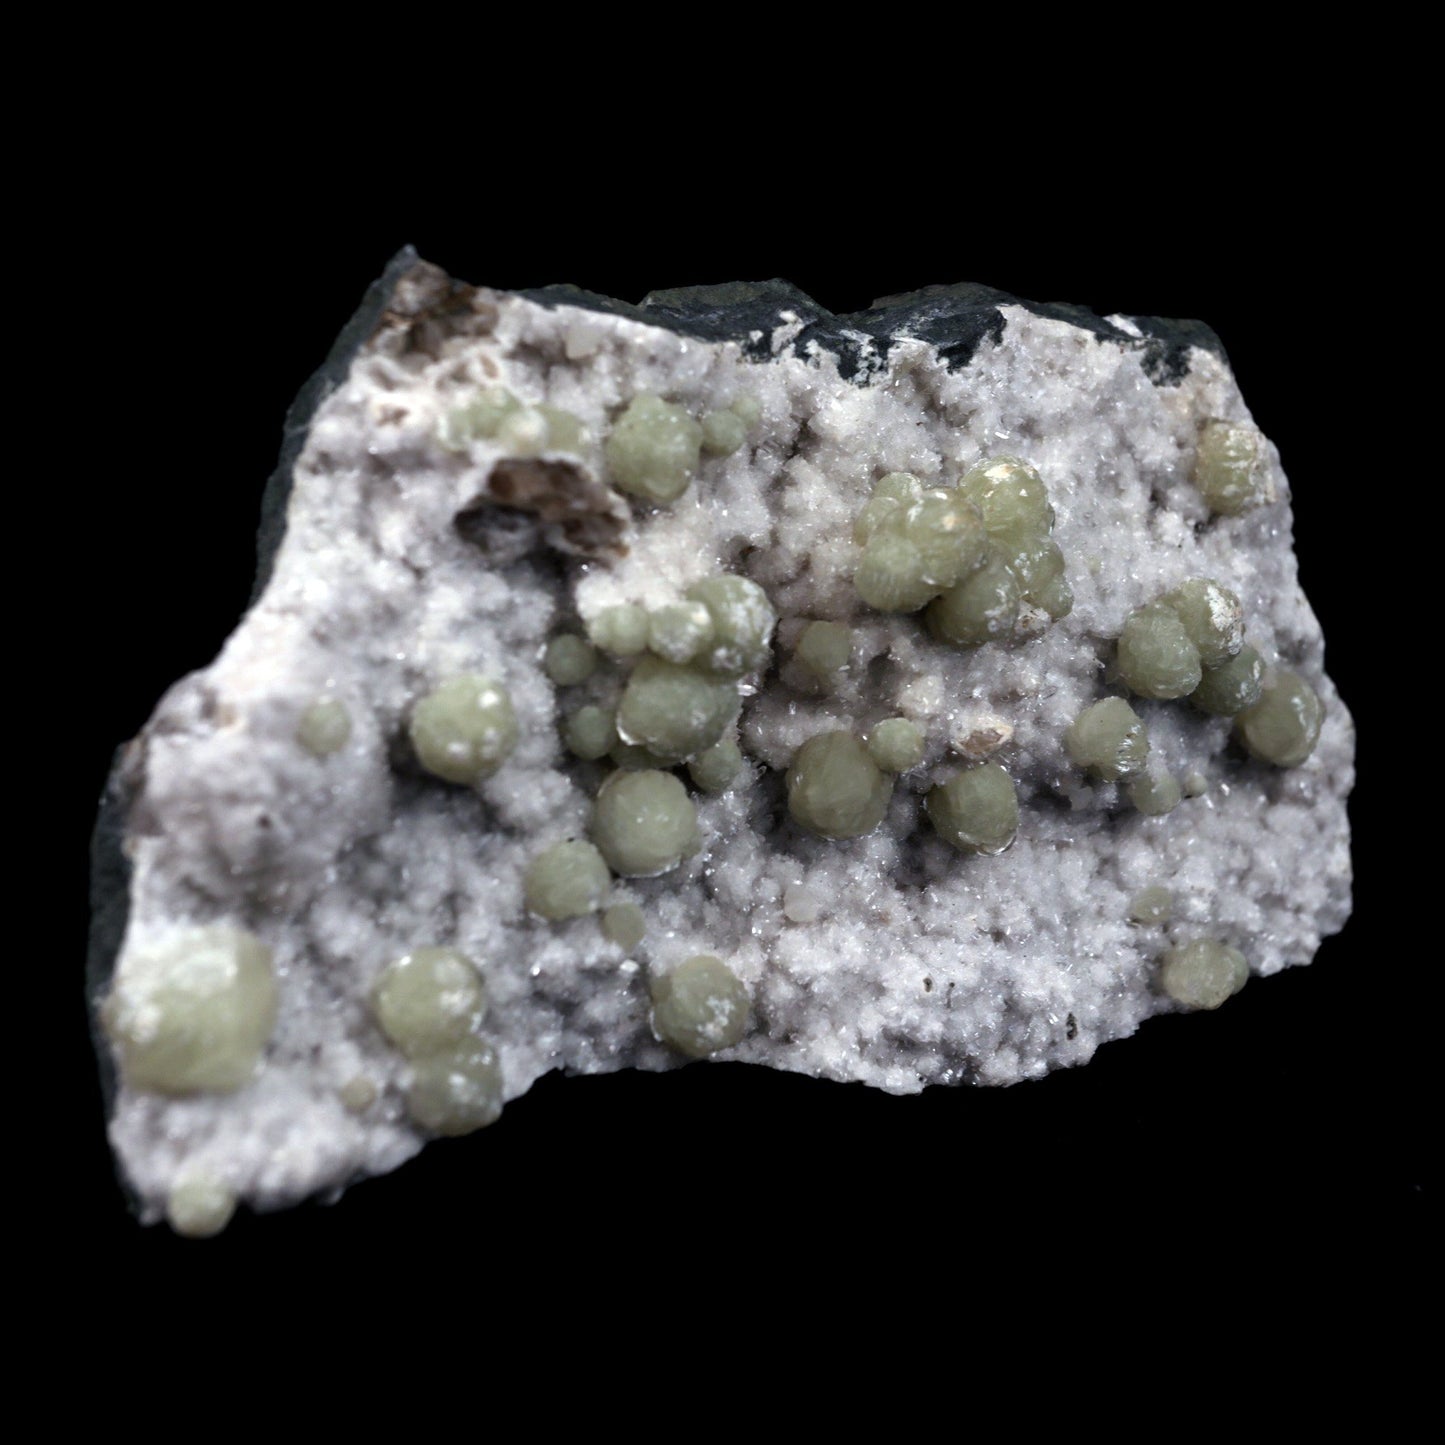 Gyrolite Balls on Chalcedony Natural Mineral Specimen # B 4898  https://www.superbminerals.us/products/gyrolite-balls-on-chalcedony-natural-mineral-specimen-b-4898  Features: Magnificent gyrolite balls scattered throughout a chalcedony matrix.extremely interesting item to have in one's collection Primary Mineral(s): GyroliteSecondary Mineral(s): N/AMatrix: Chalcedony